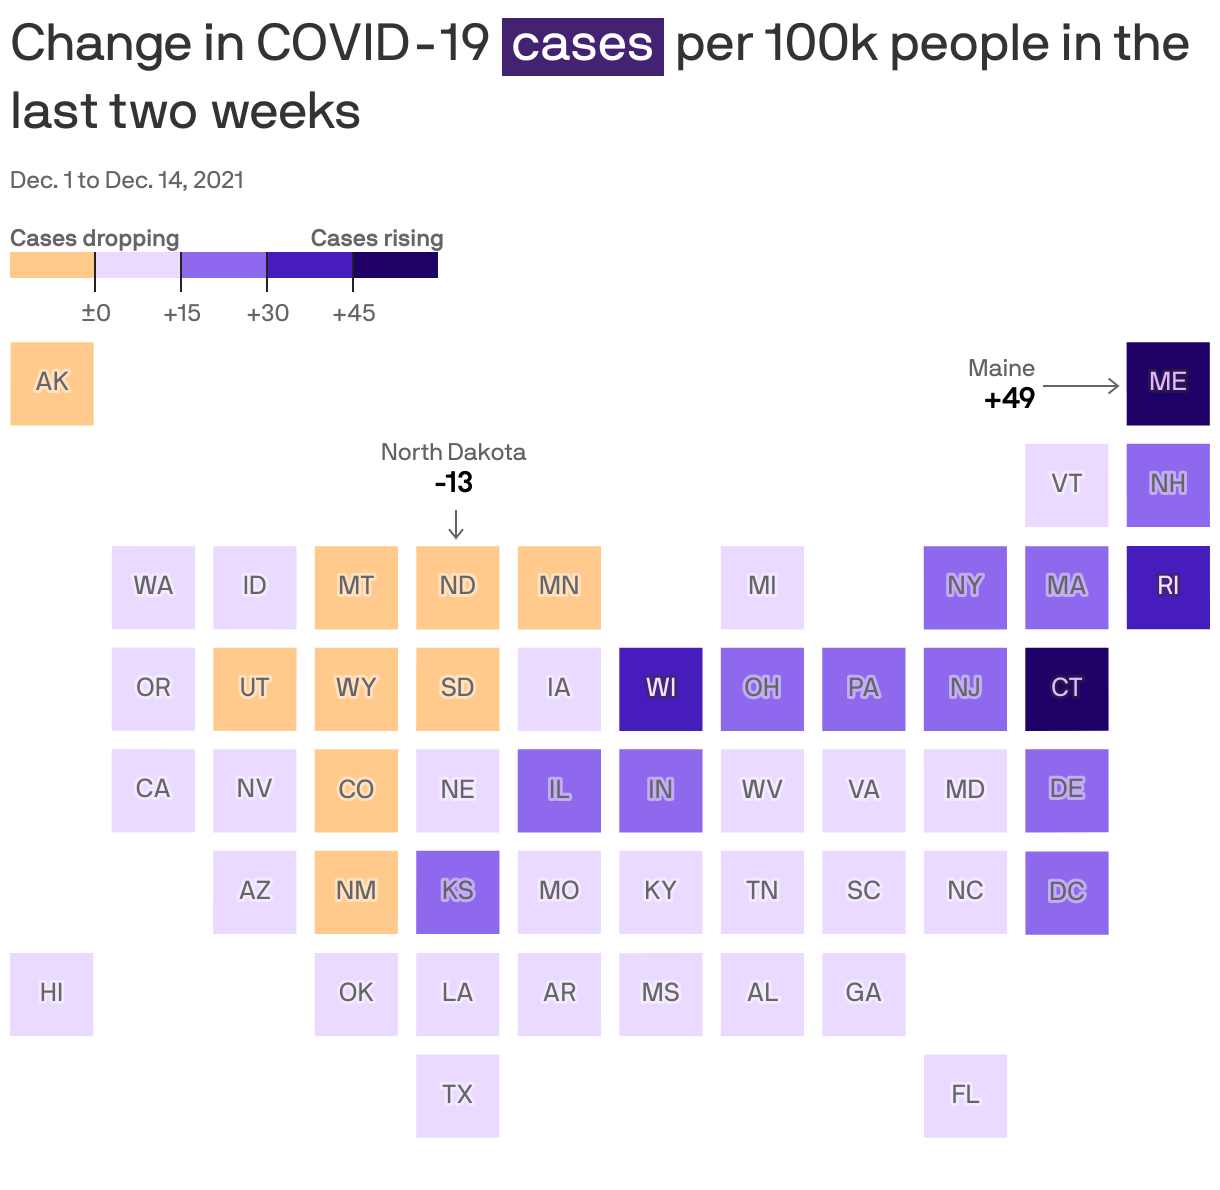 Change in COVID-19 <span style="background:#432371; padding:0px 5px 3px 5px;color:white;">cases</span> per 100k people in the last two weeks